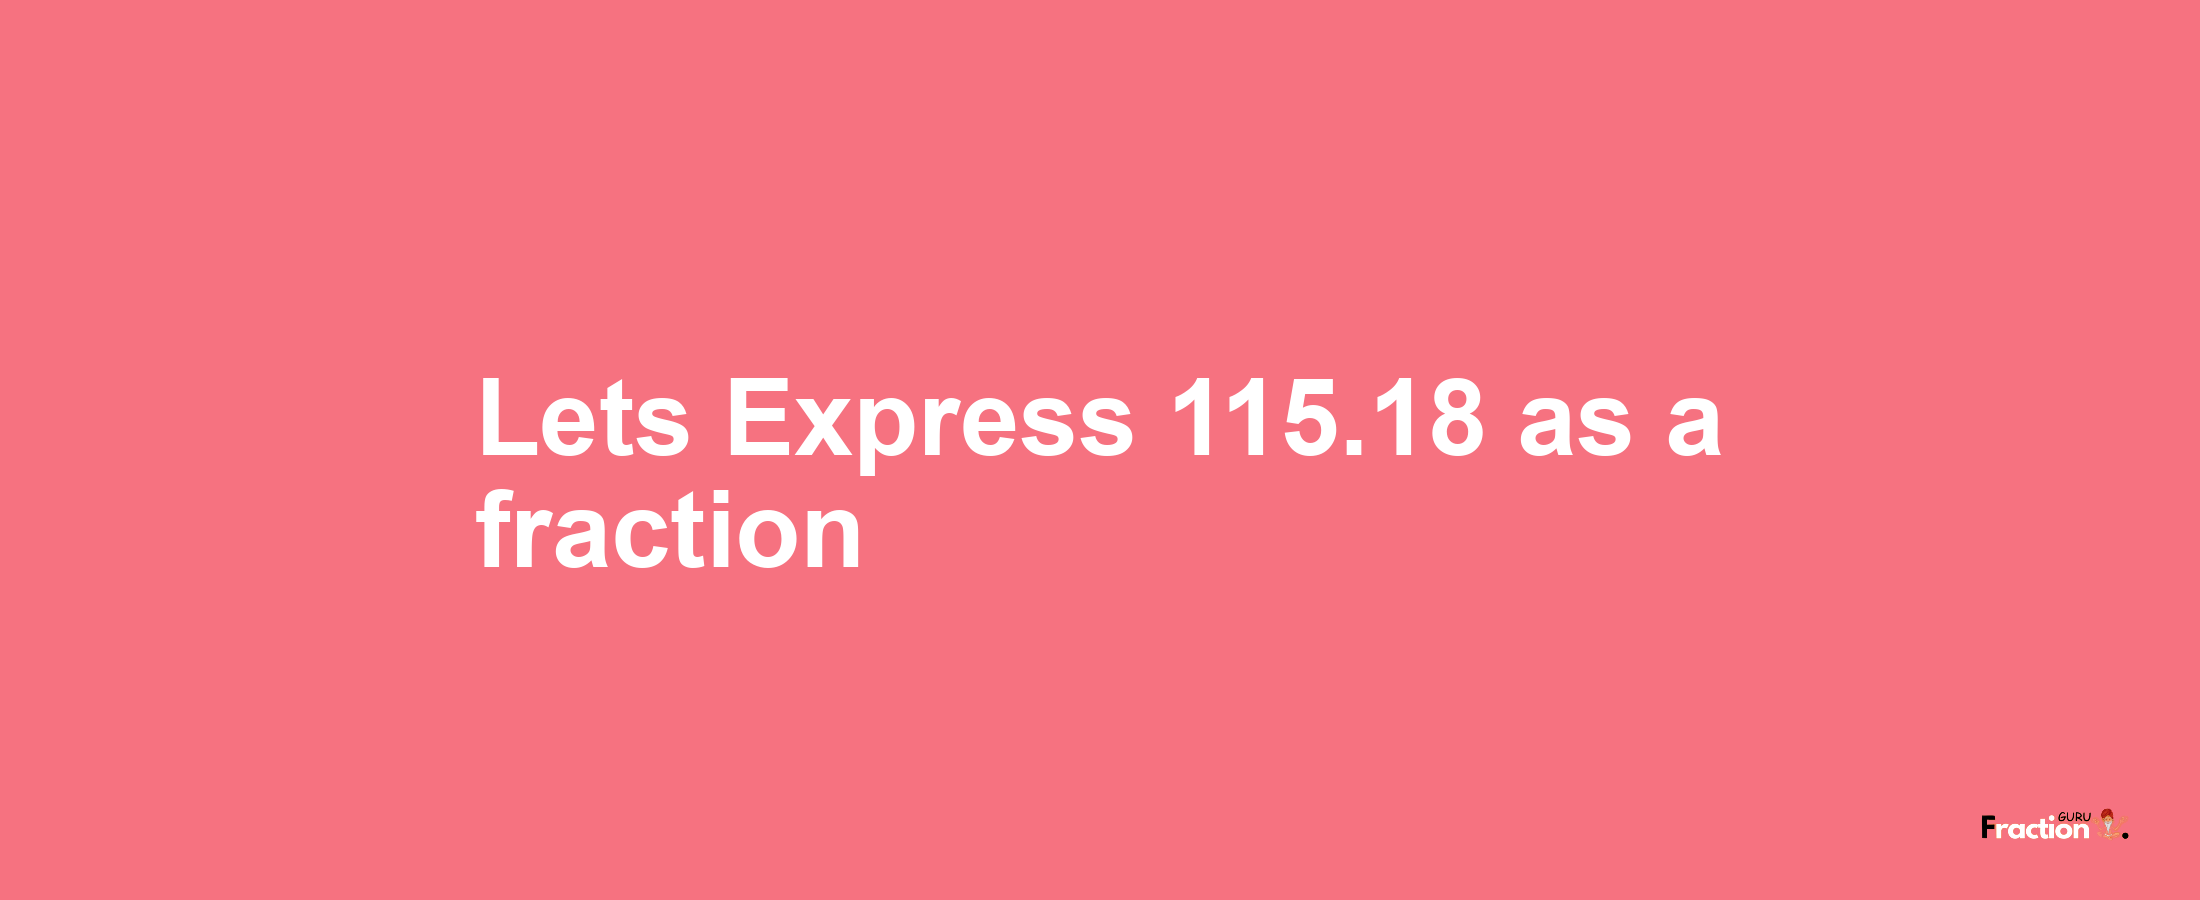 Lets Express 115.18 as afraction